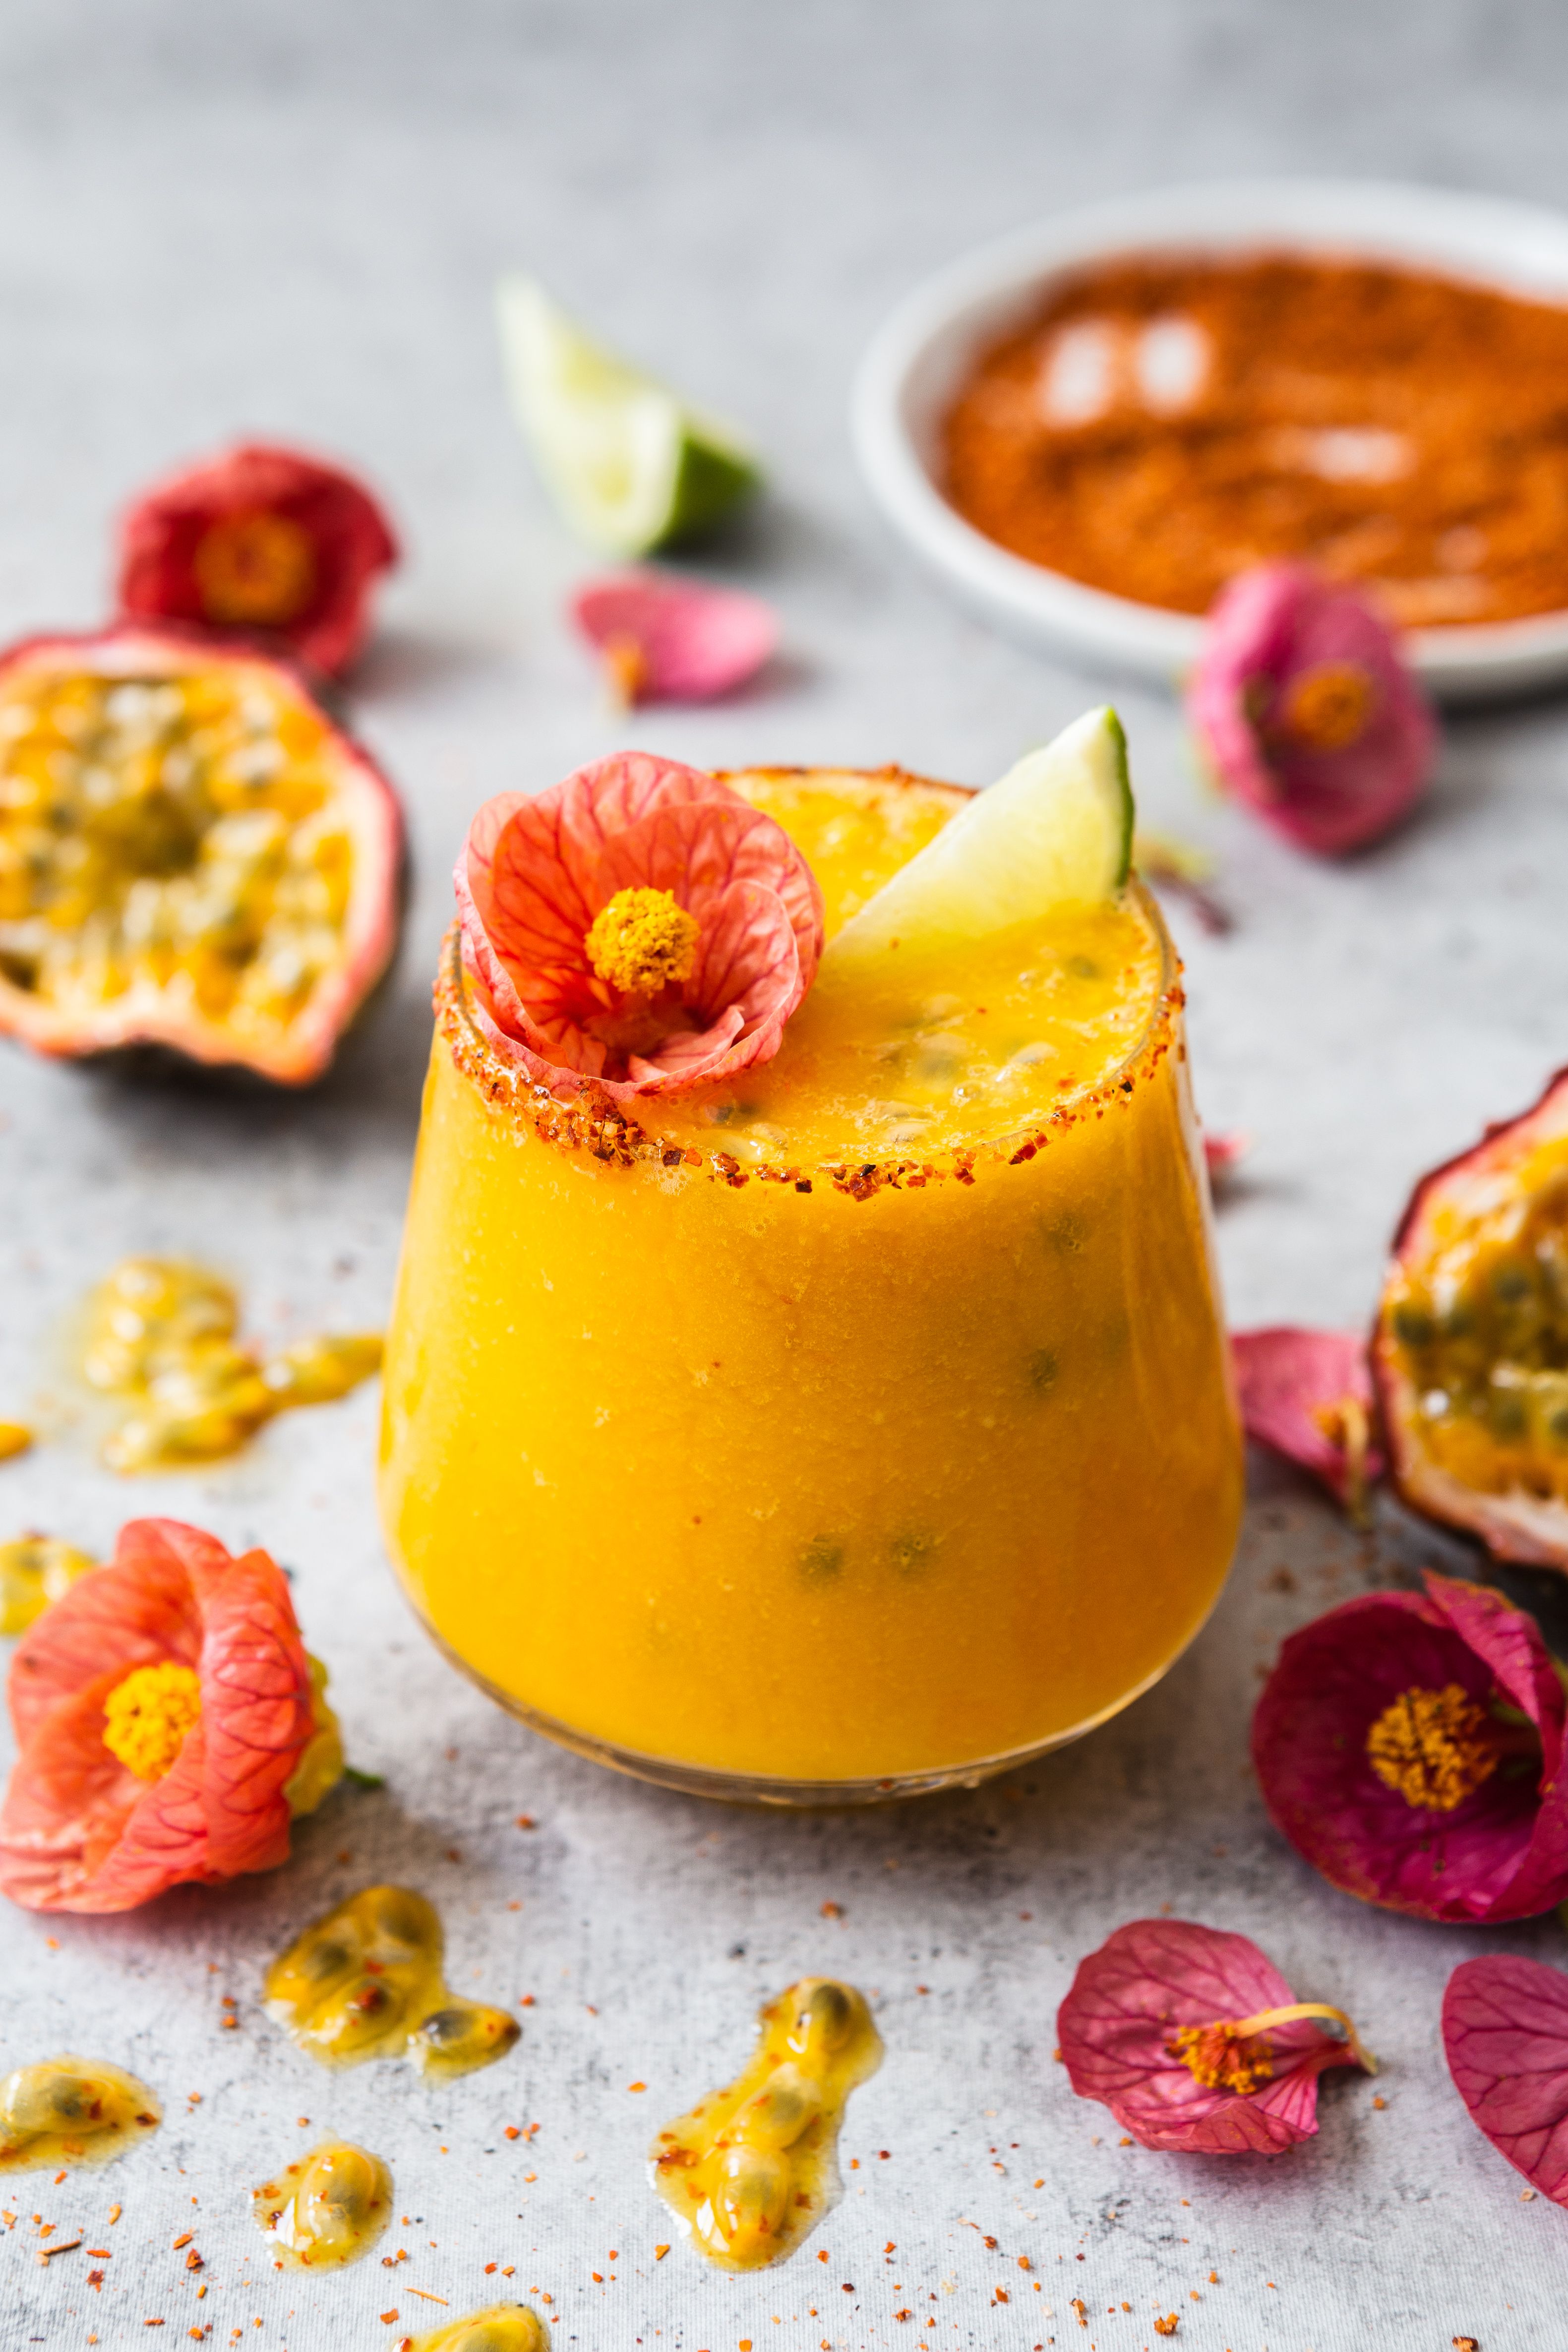 Frozen Passion Fruit The Margaritas | and Mango Feedfeed